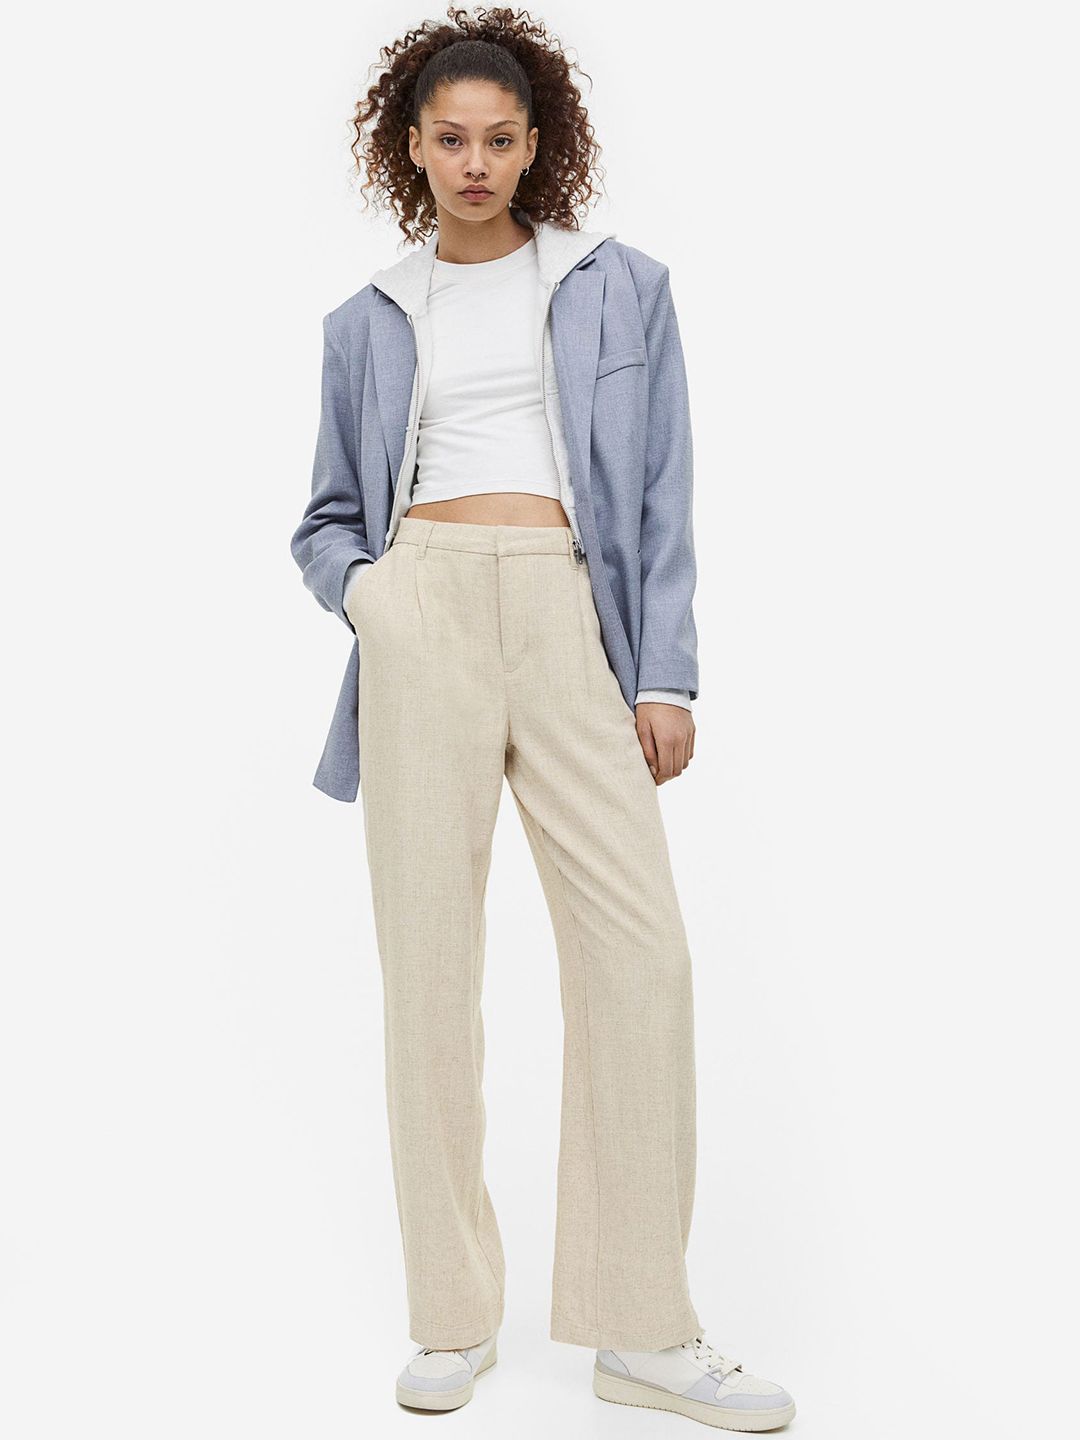 H&M Women Linen-Blend Tailored Trousers Price in India